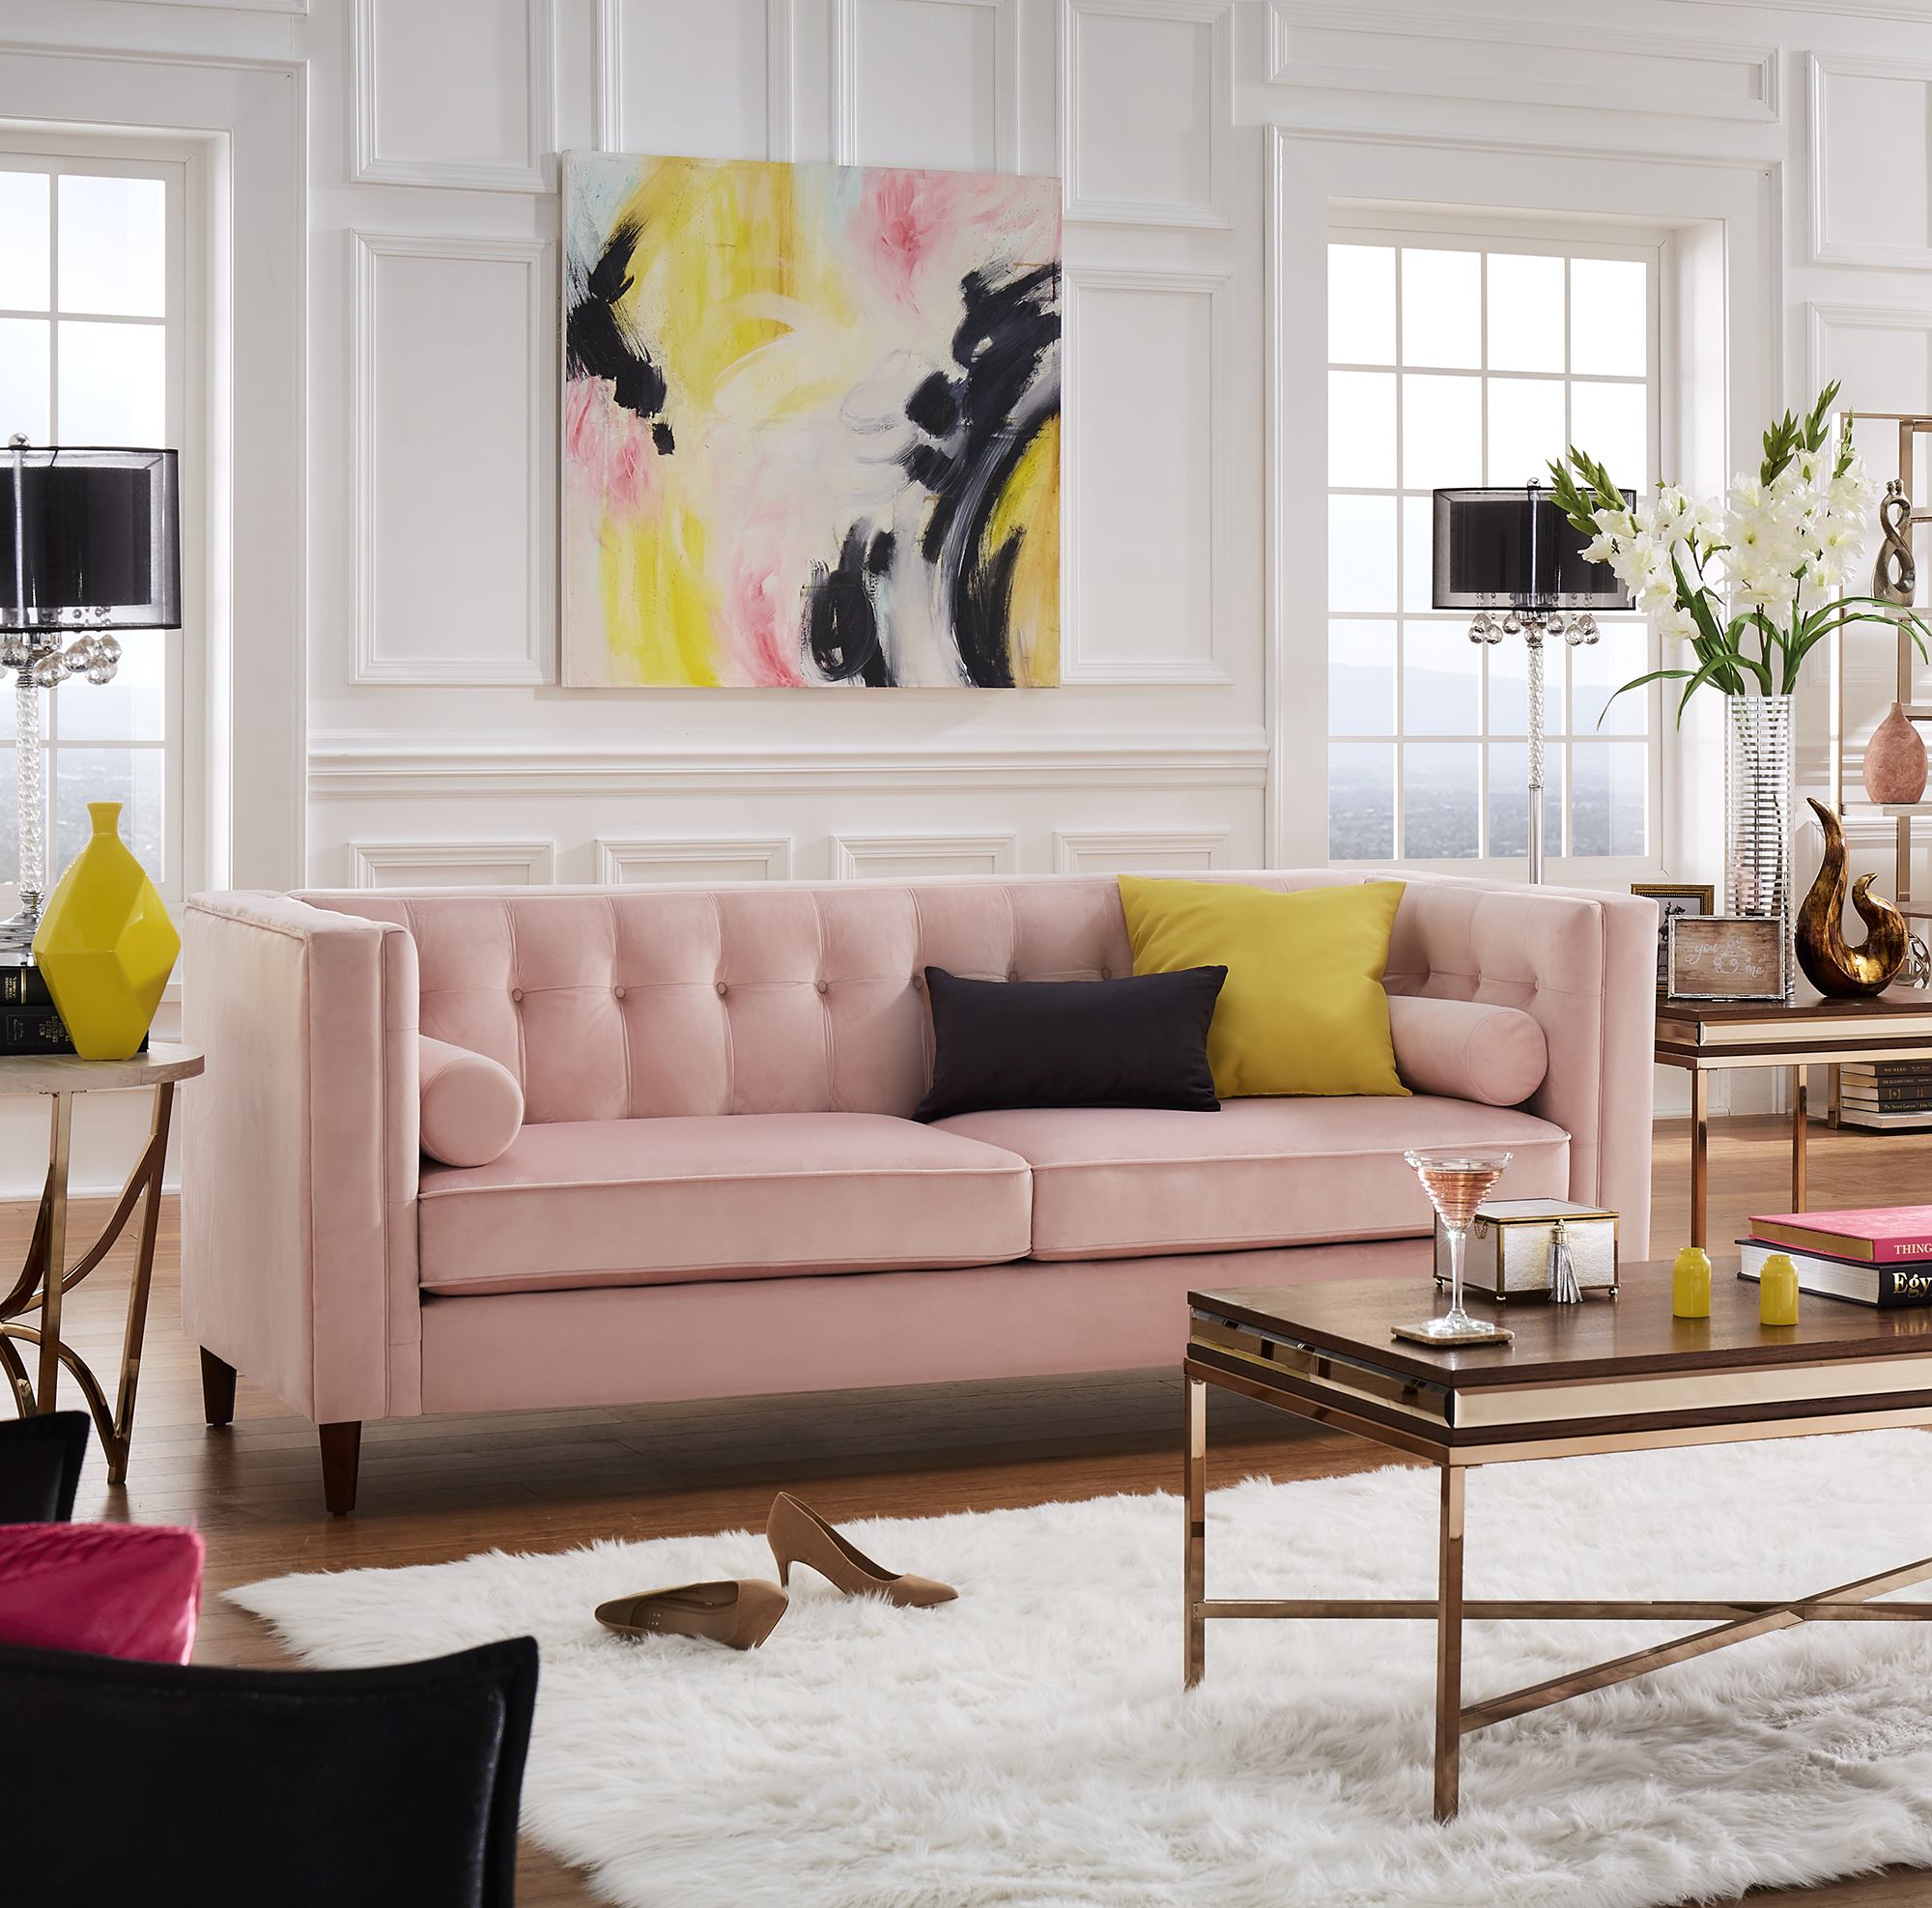 This last image displays the Tuxedo Pink Velvet Sofa with Accent Pillows by iNSPIRE Q Bold. With the tuxedo silhouette, there is button tufting all over the back and arms. There is plenty of room to add even more accent pillows.